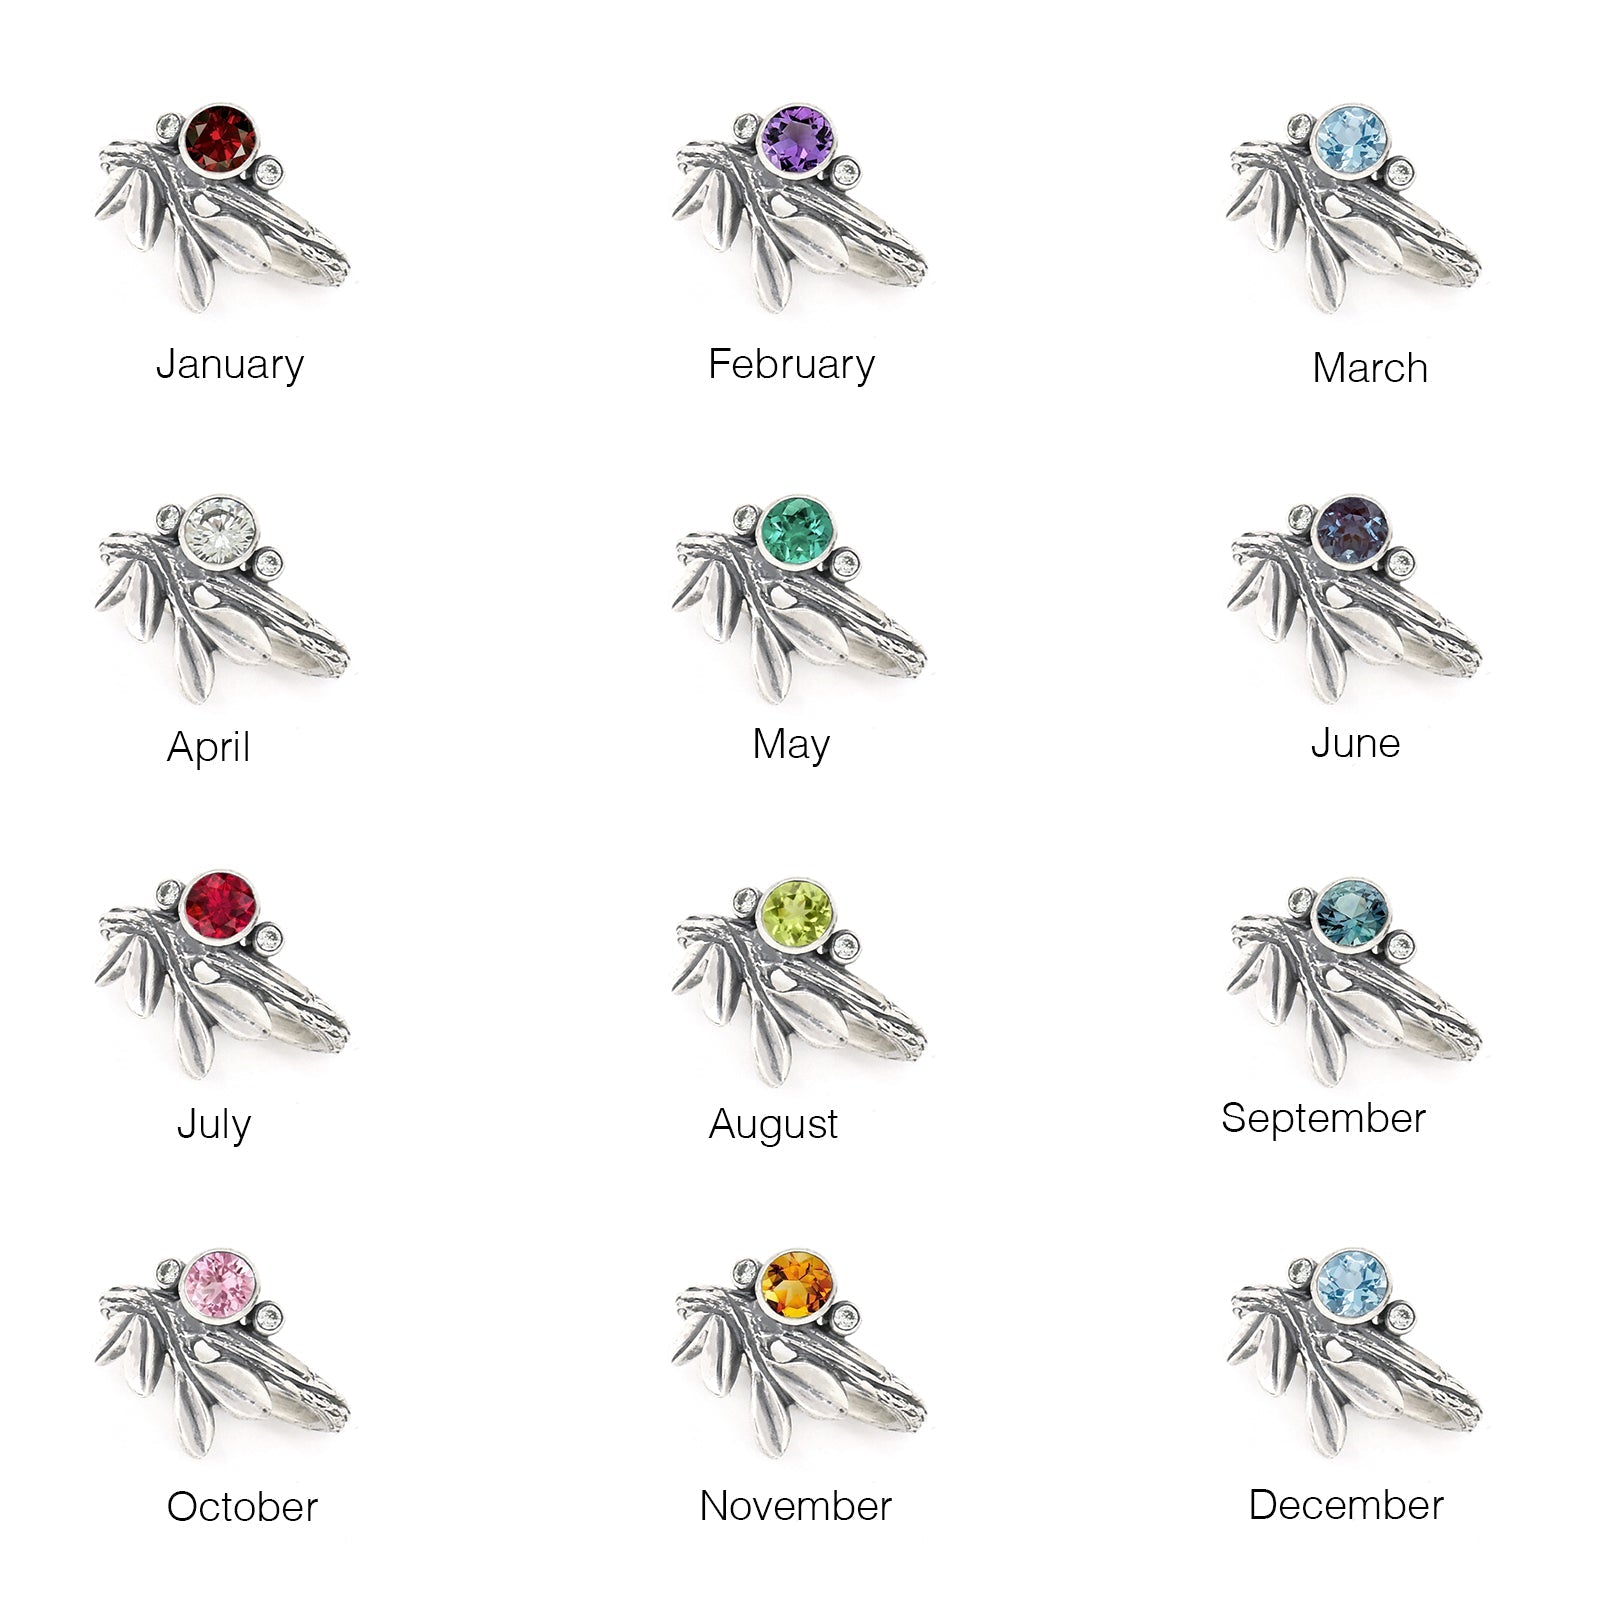 Silver Growing Love Birthstone Ring - your choice of 5mm stone - Ring July - Lab Created Ruby January - Idaho Garnet 6754 - handmade by Beth Millner Jewelry